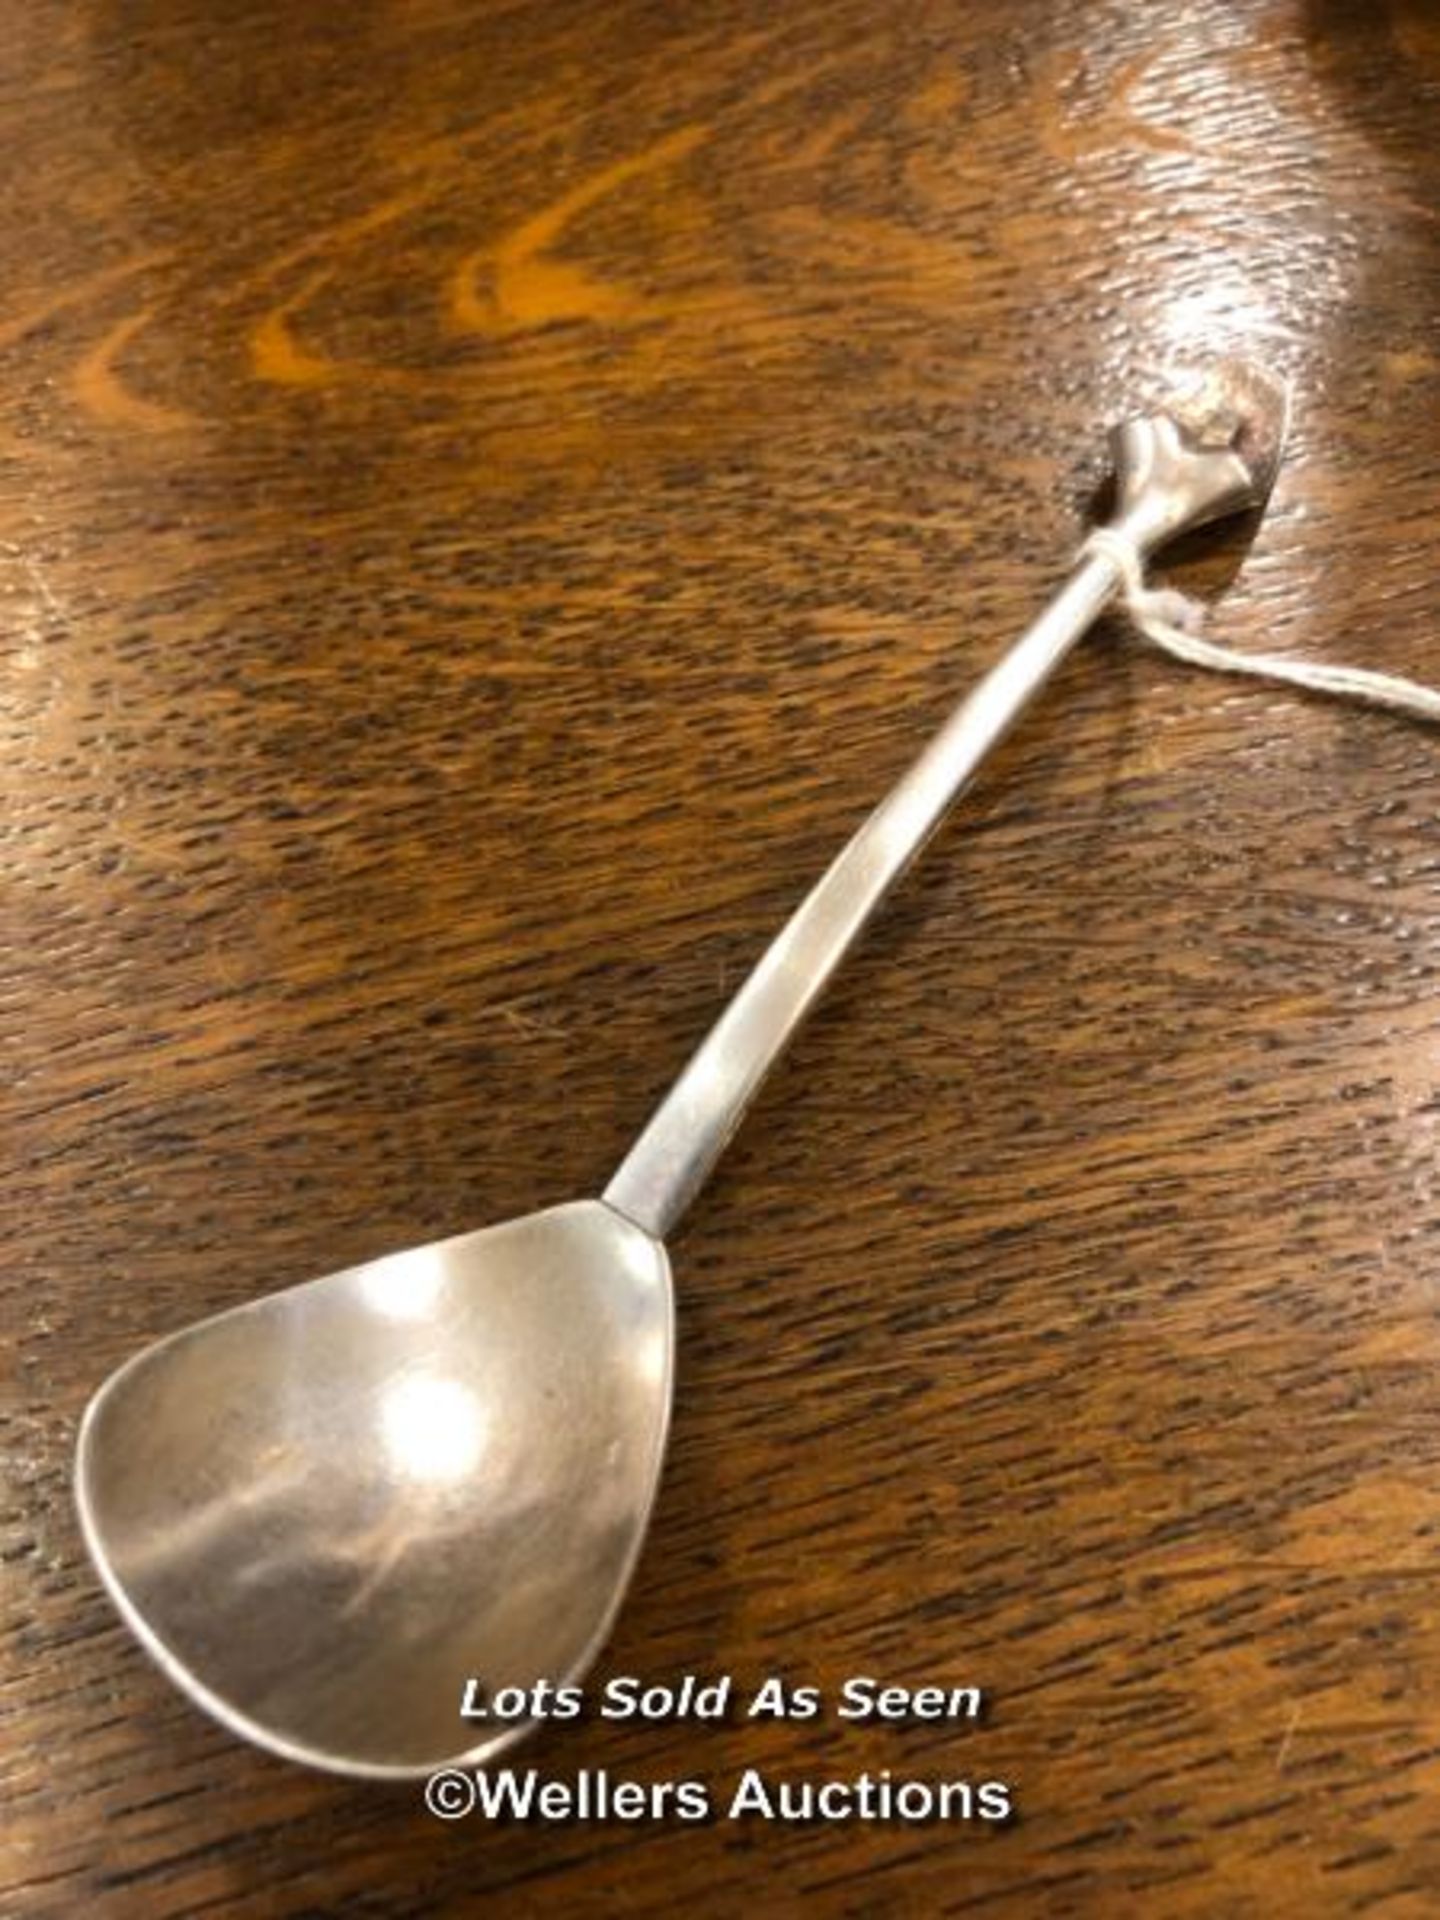 *20TH CENTURY SILVER SPOON, ANTHONY PATON HAWKSLEY, LONDON 1975 / LOCATED AT VICTORIA ANTIQUES,